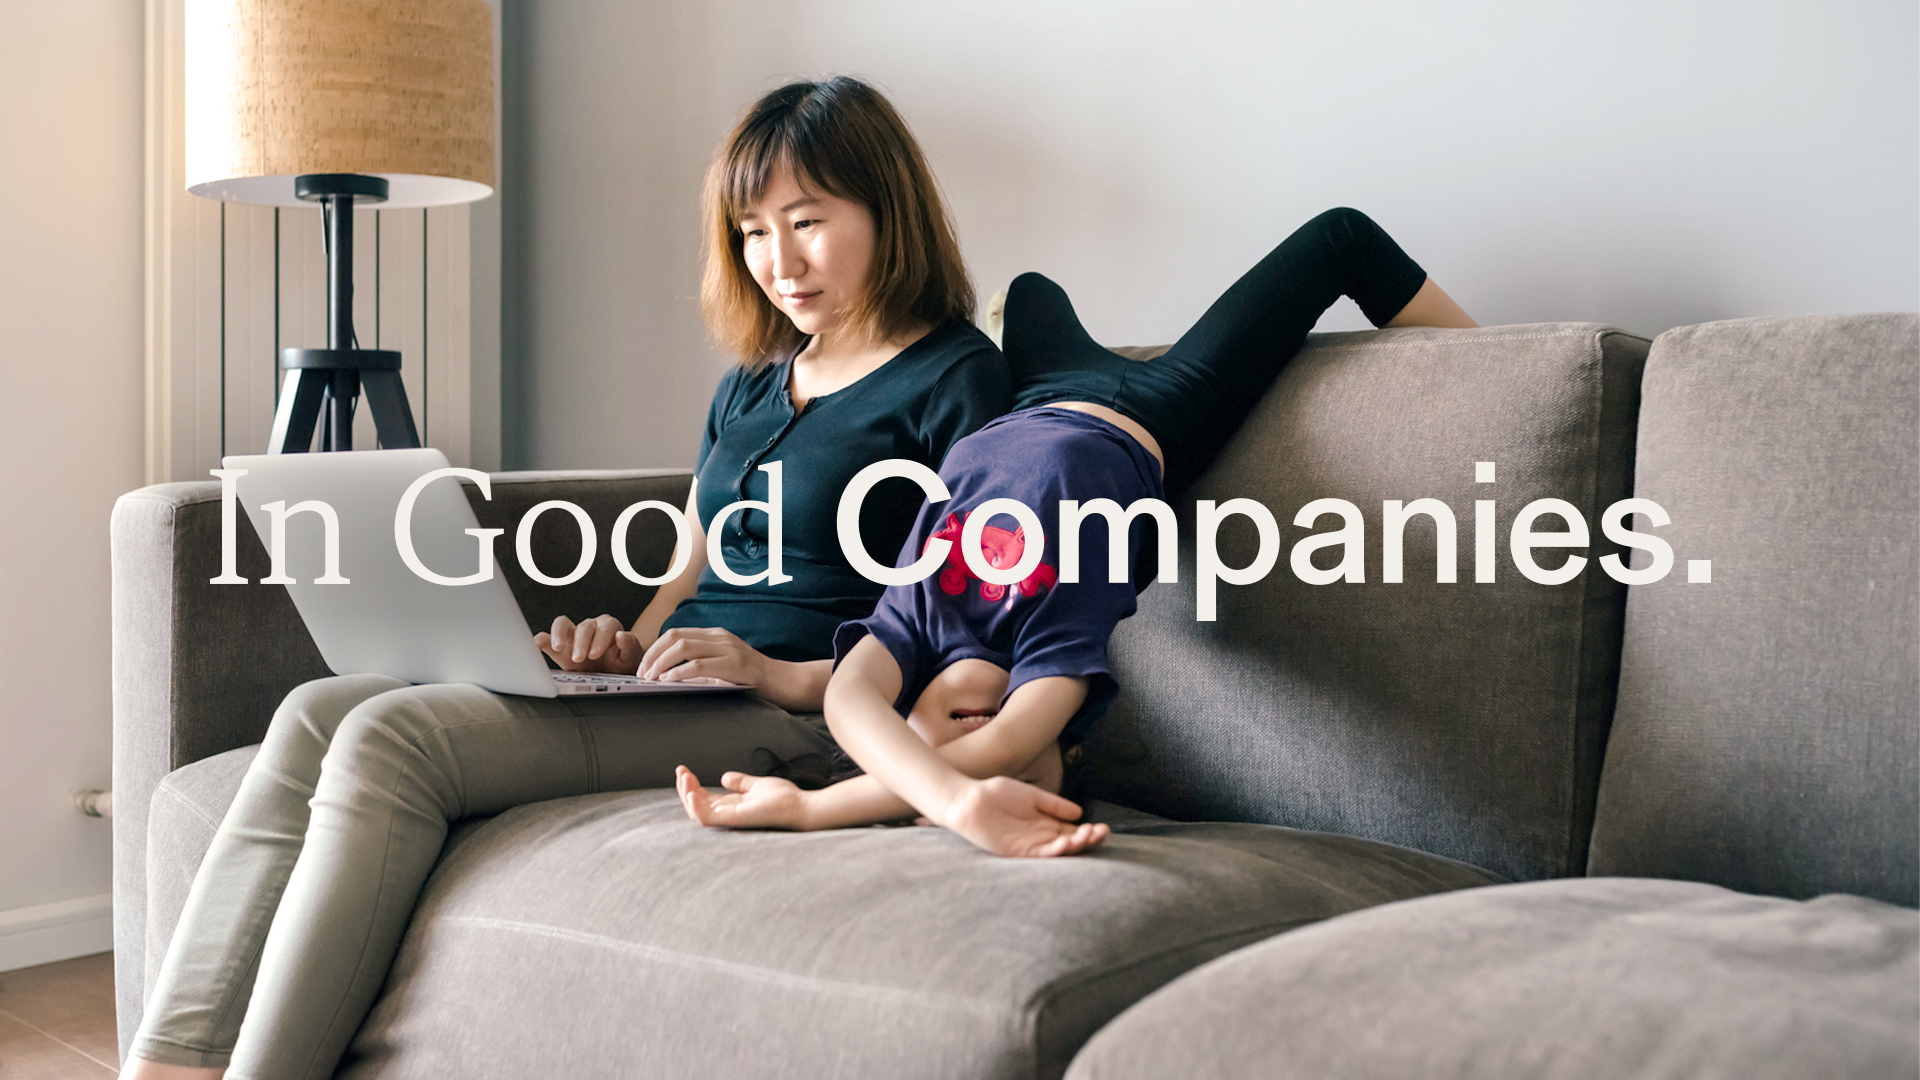 p﻿hoto of mom and child with tagline “In Good Companies.” on top